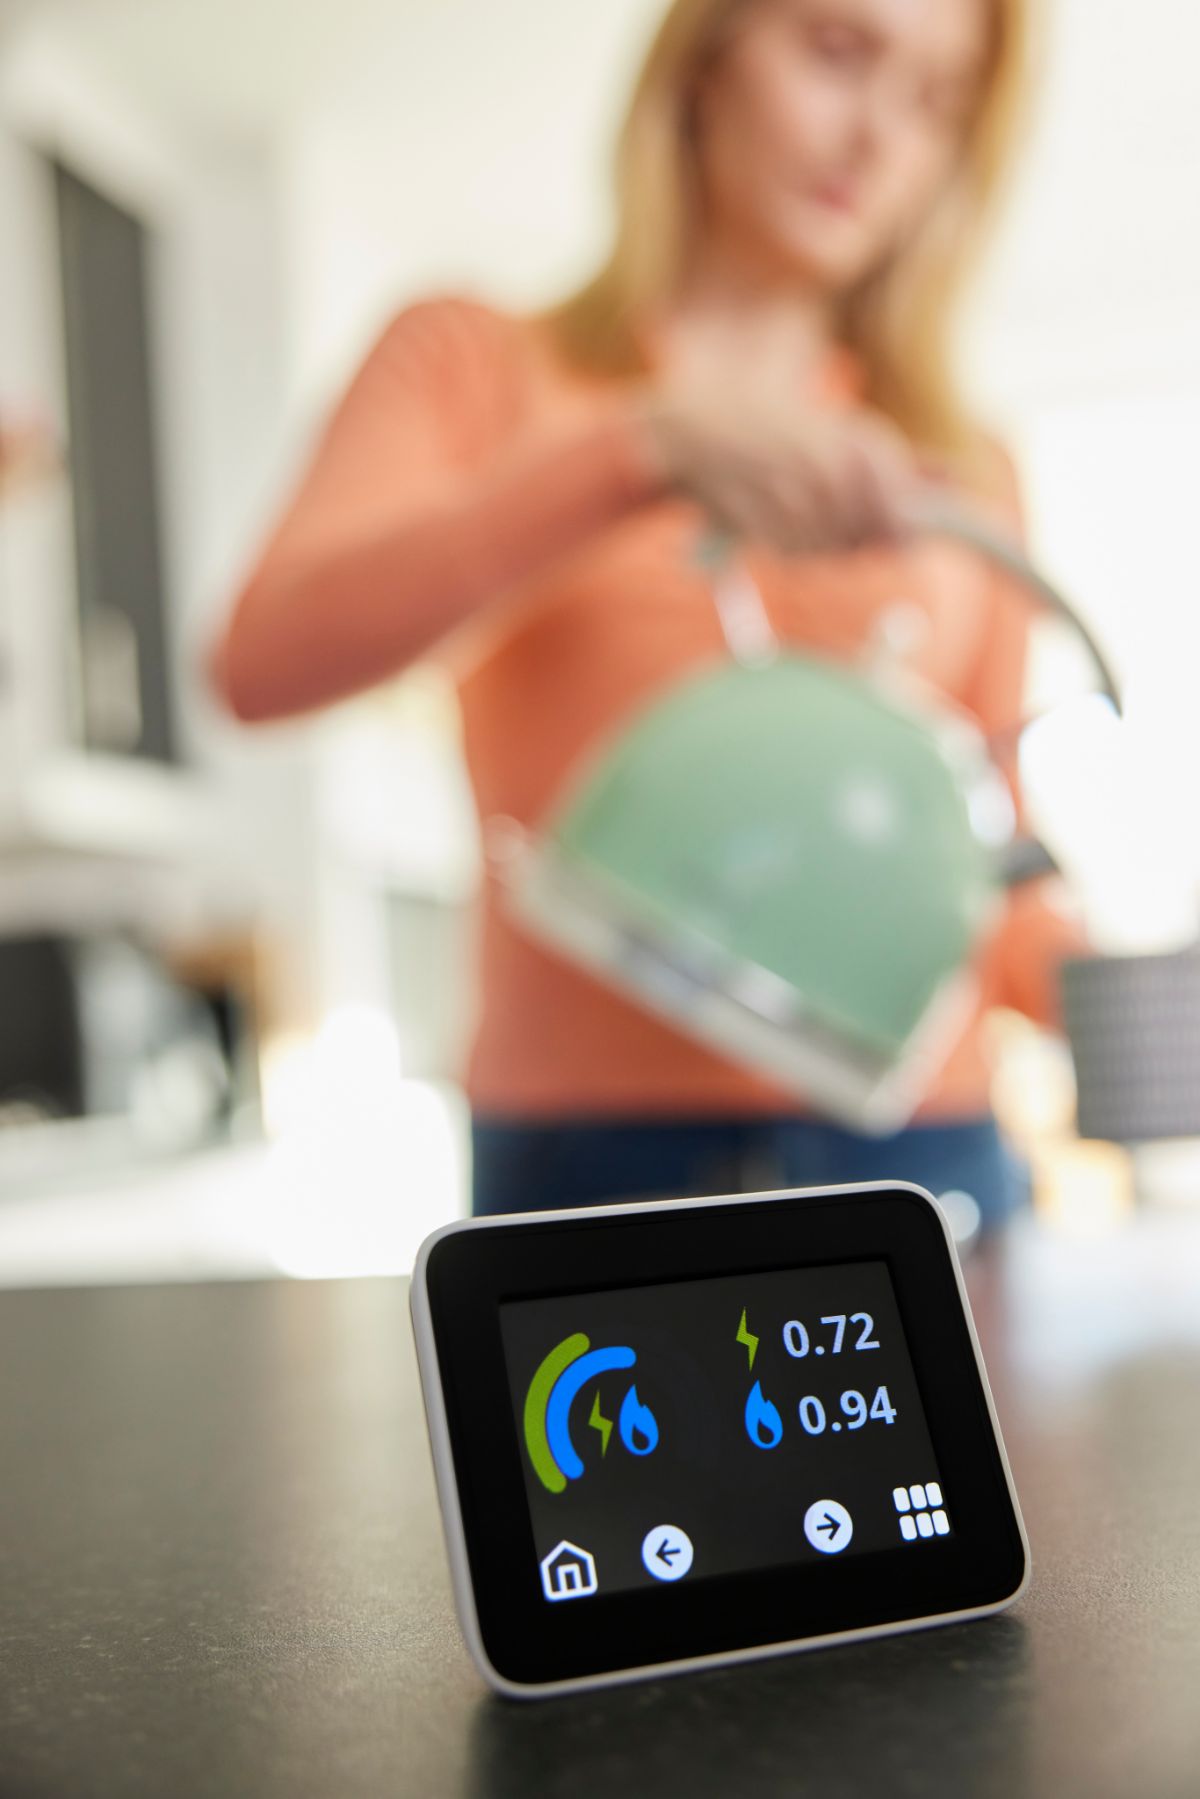 Home energy meter in foreground with woman pouring kettle in background.